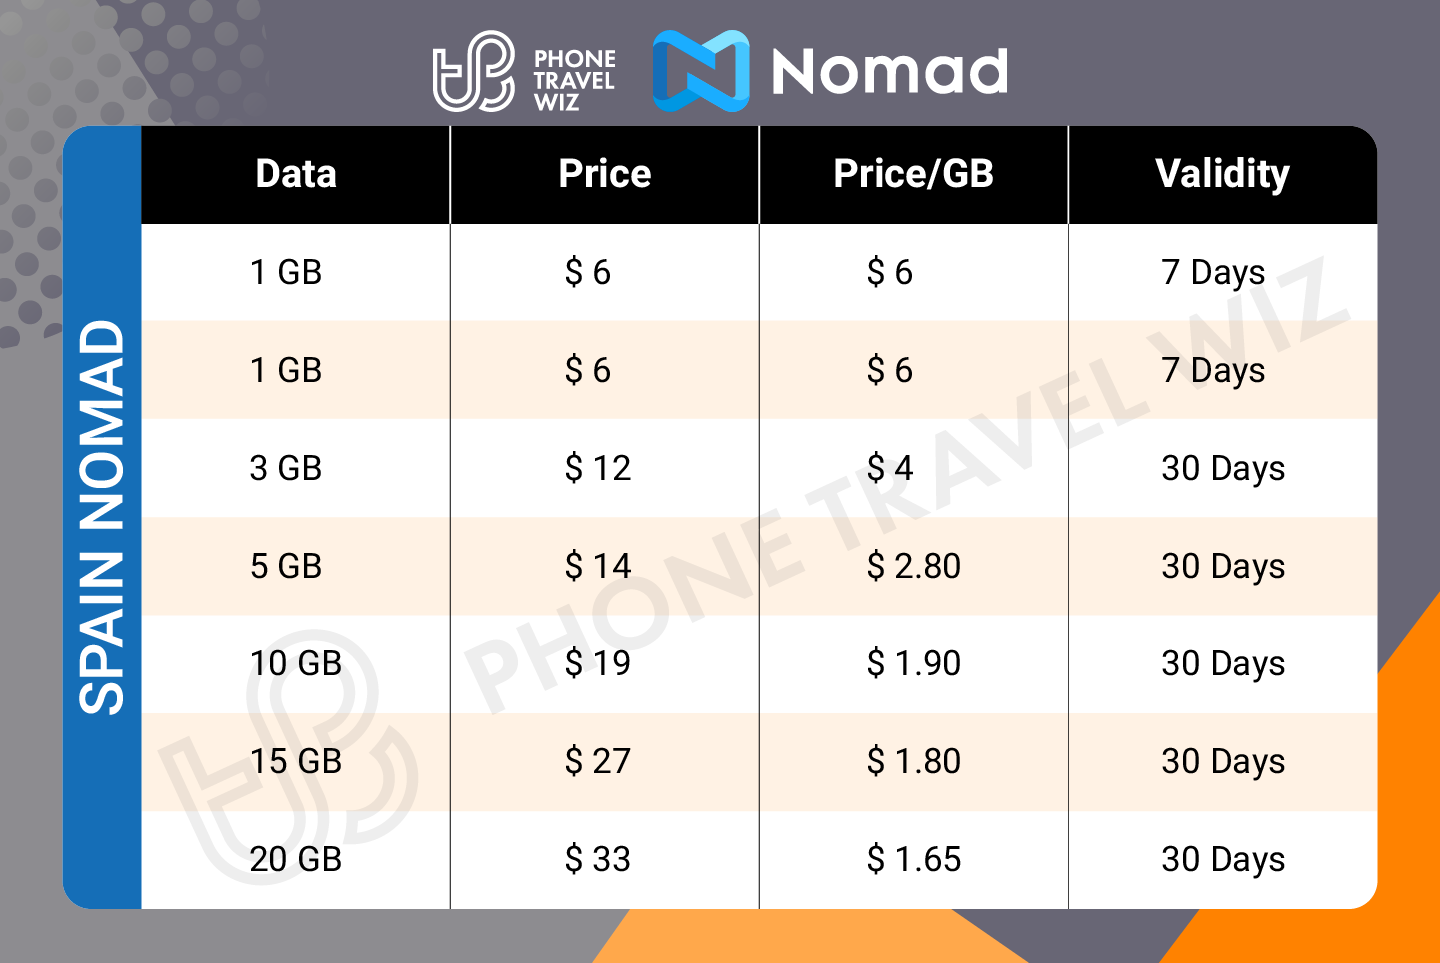 Nomad Spain eSIM Price & Data Details Infographic by Phone Travel Wiz